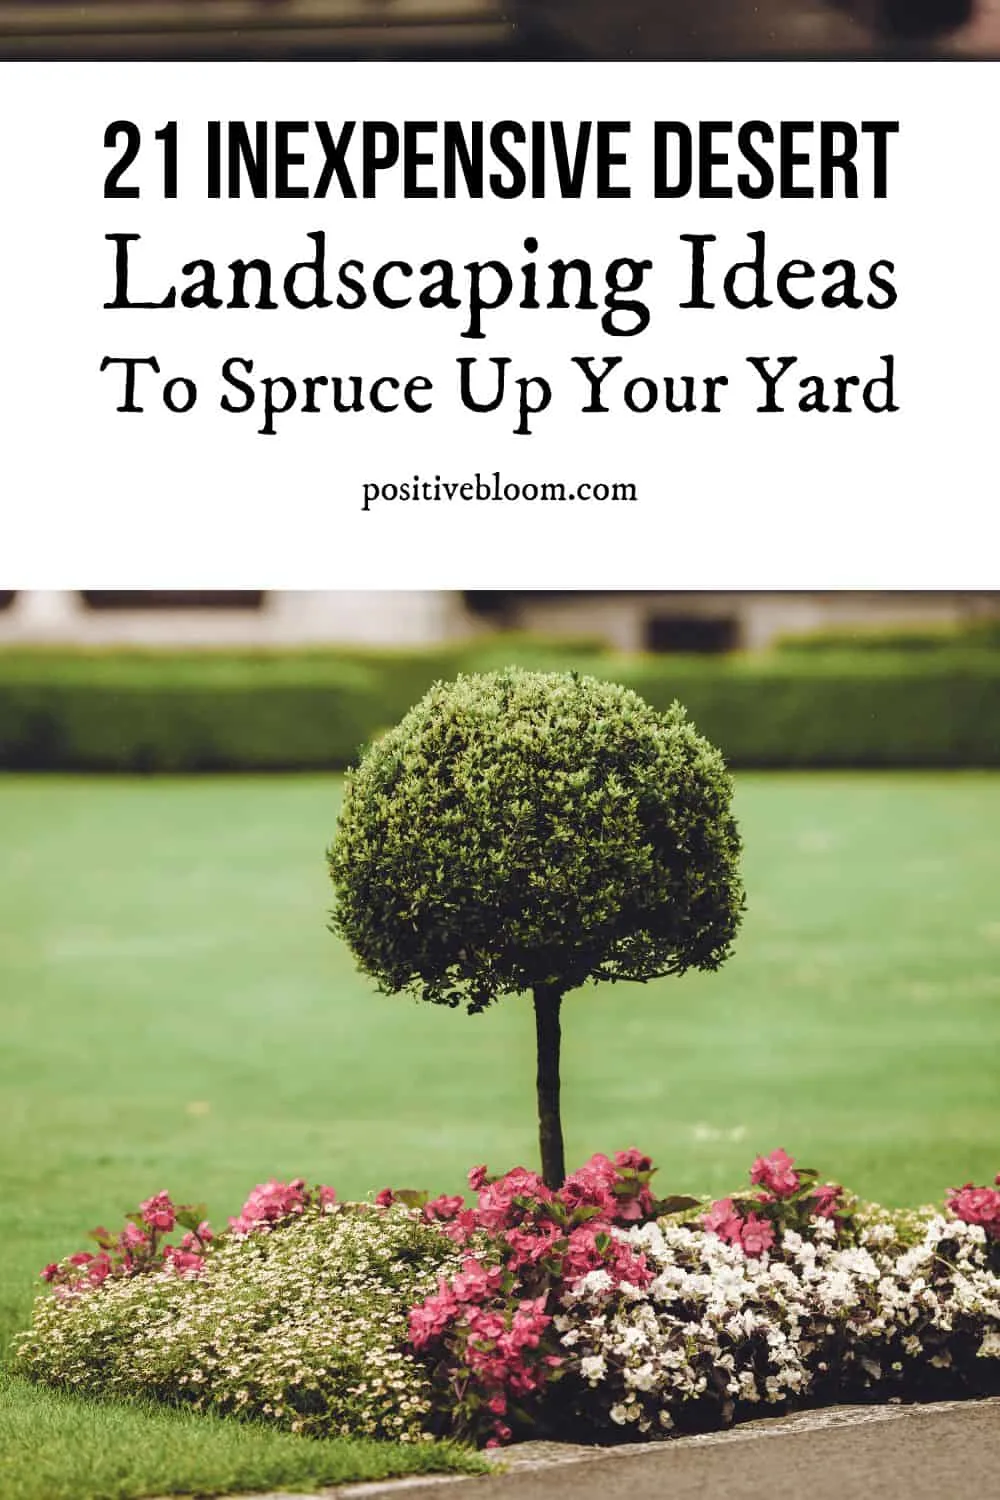 21 Inexpensive Desert Landscaping Ideas To Spruce Up Your Yard Pinterest